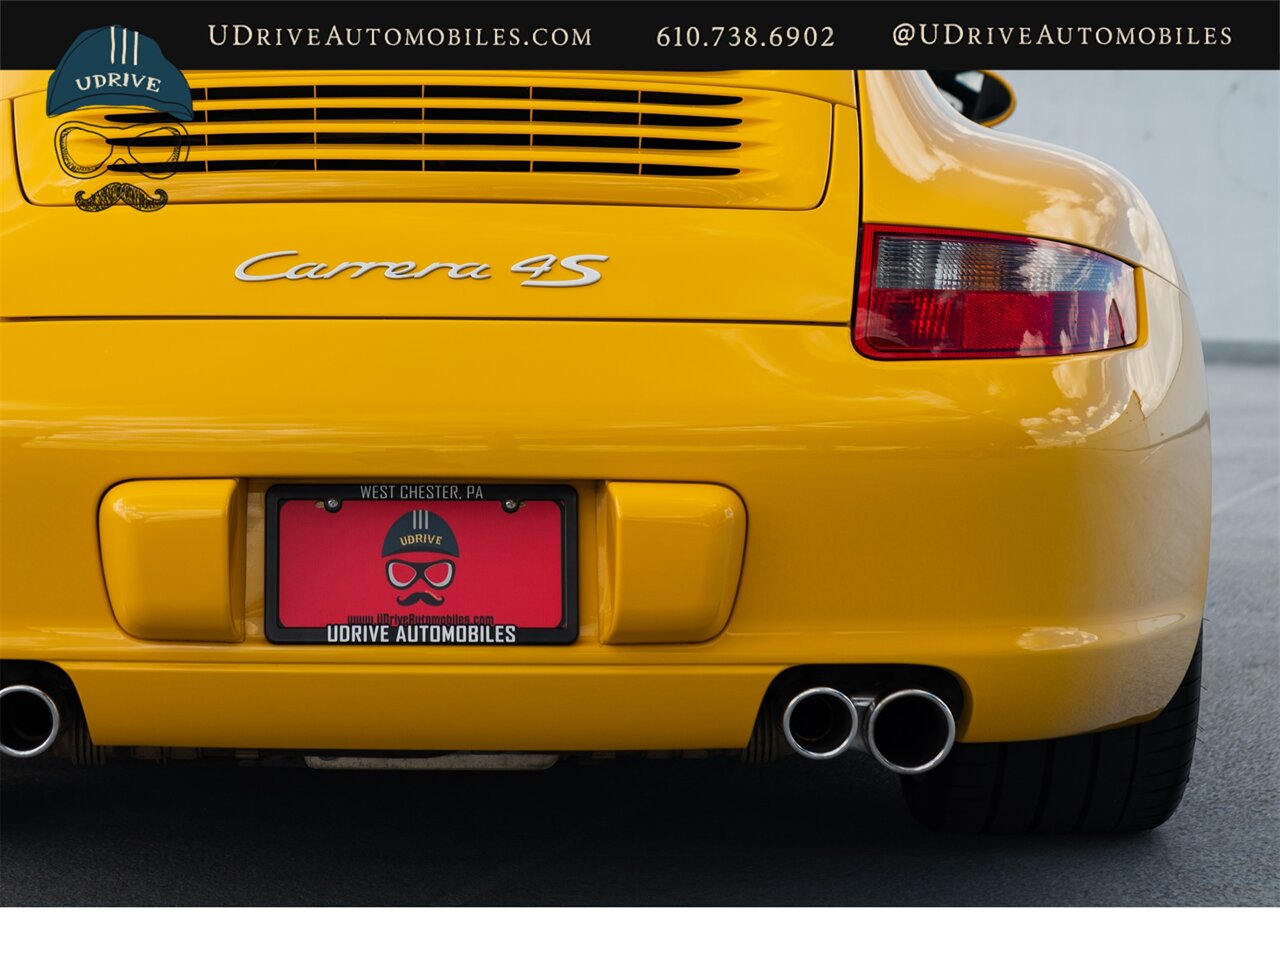 2006 Porsche 911 Carrera 4S  997 C4S 6 Speed Cocoa Full Lthr Chrono Sport Exhaust Special Color Combo - Photo 20 - West Chester, PA 19382